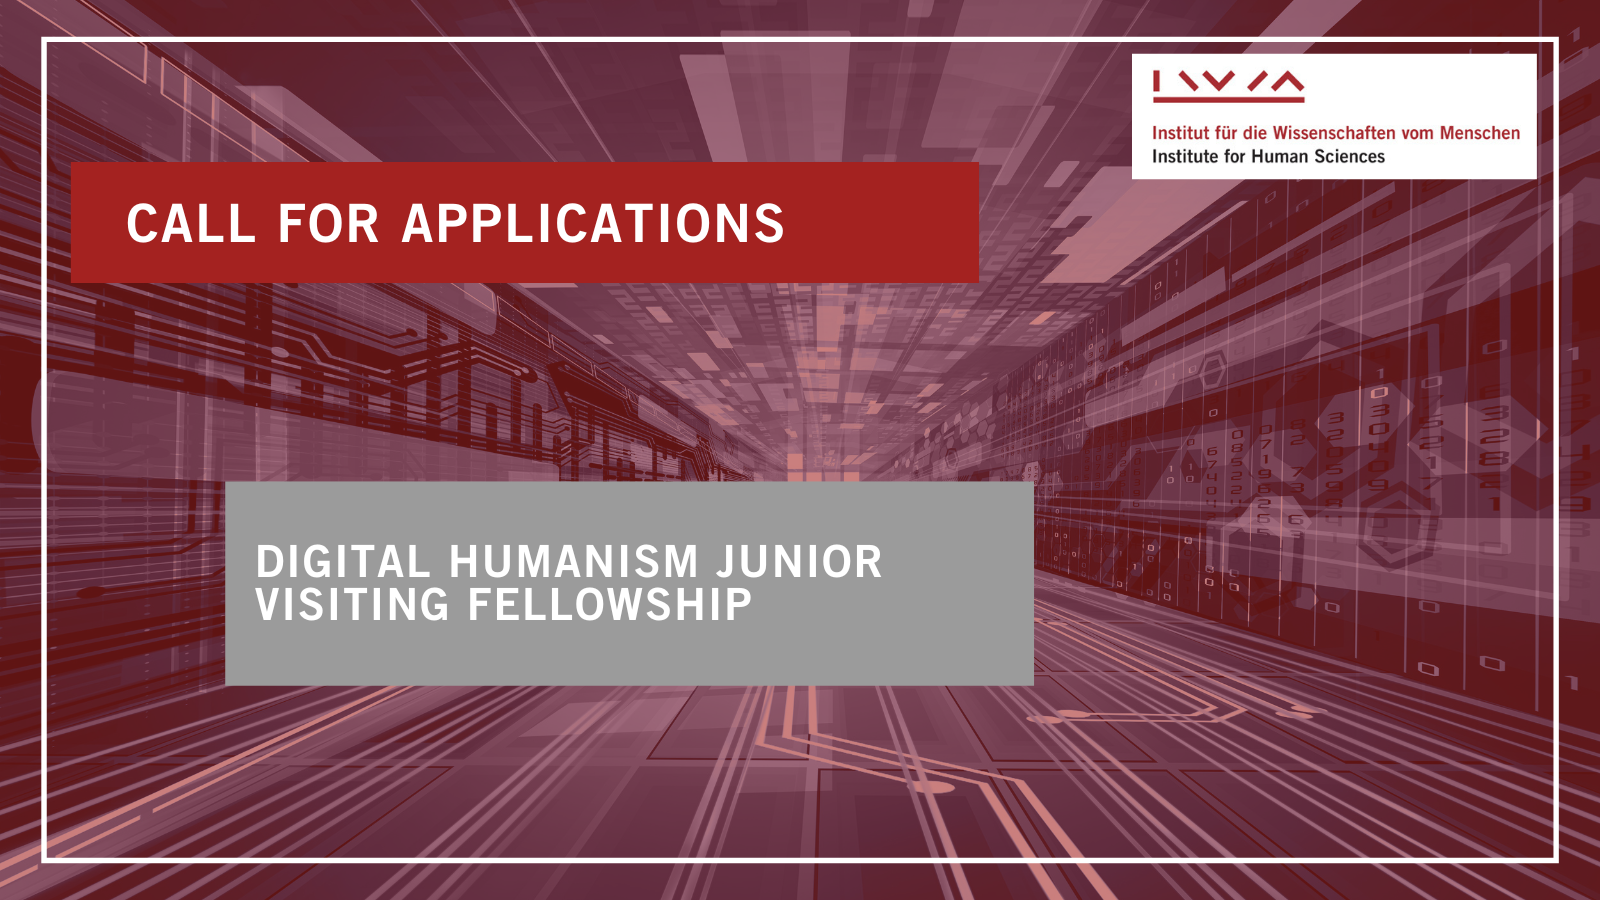 Call for Applications for the Digital Humanism Junior Visiting Fellowship 